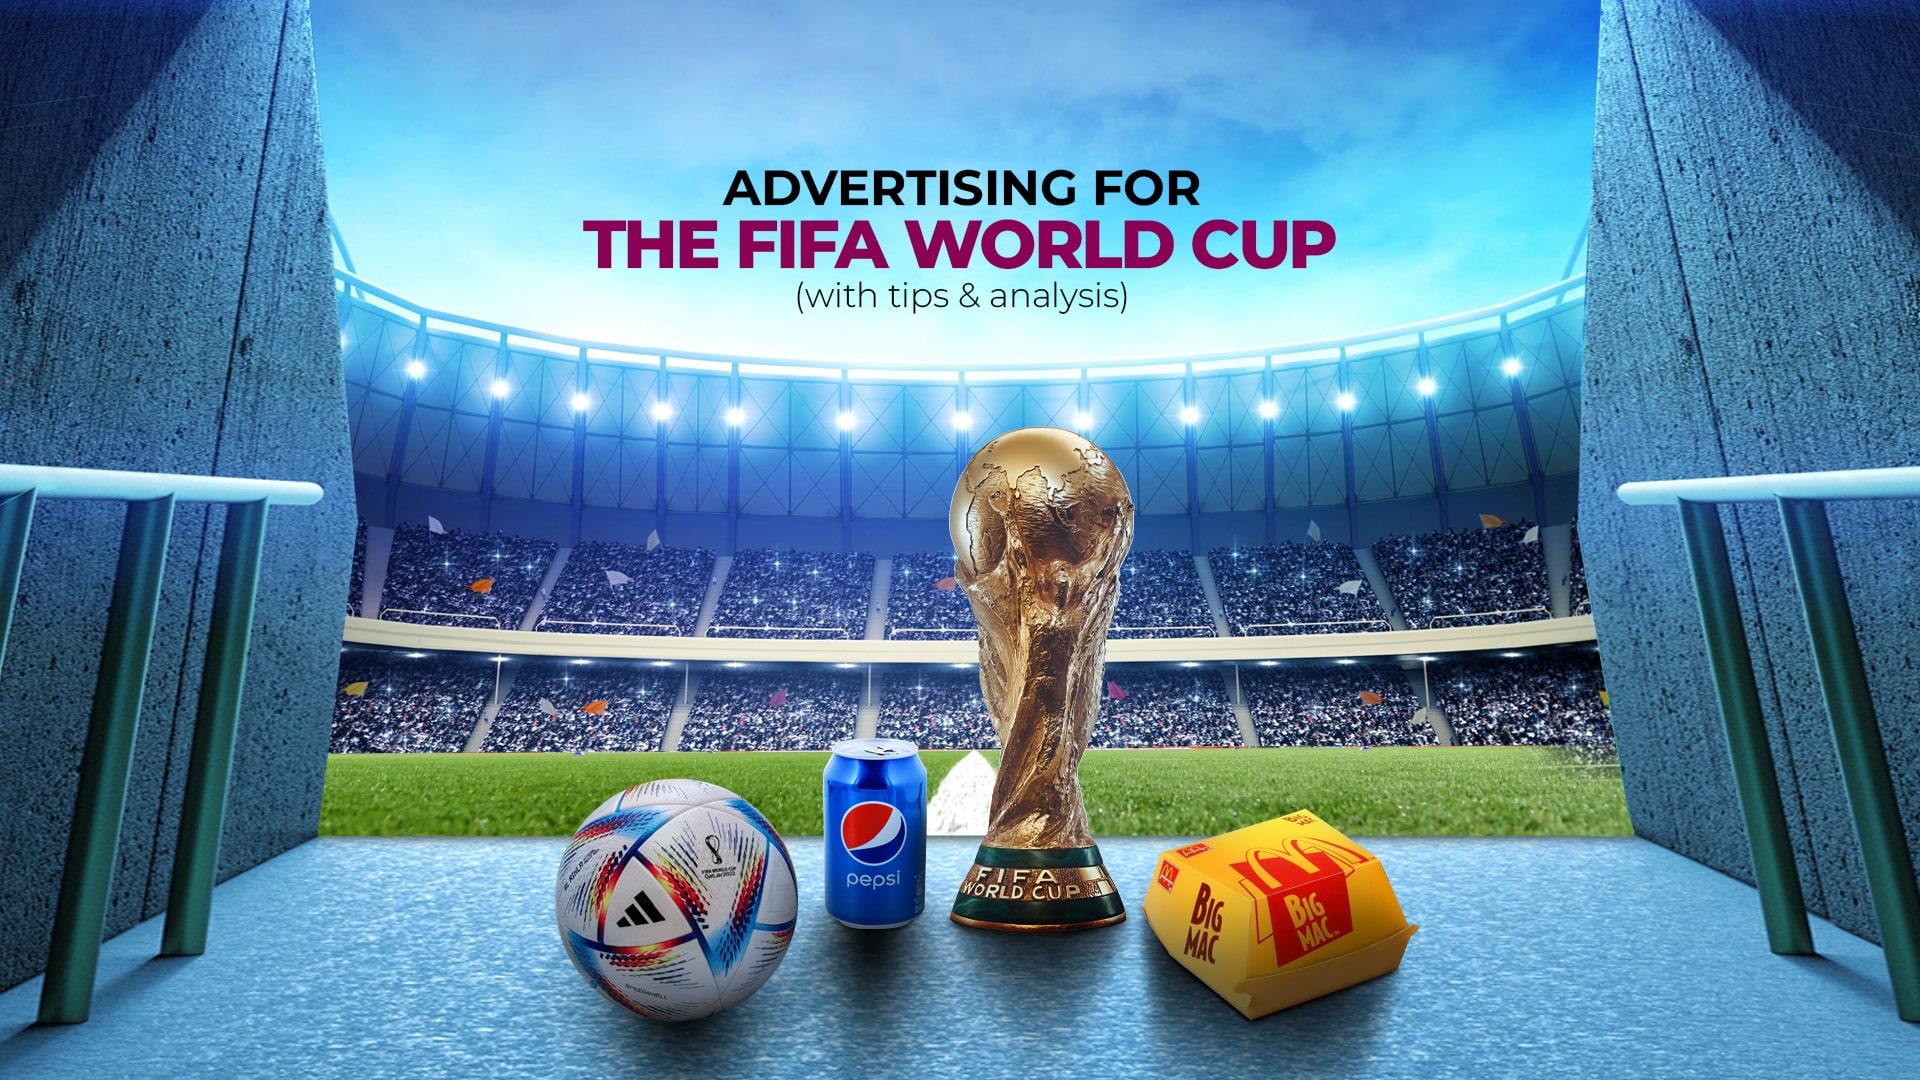 Everything you need to know to win at advertising for the FIFA World